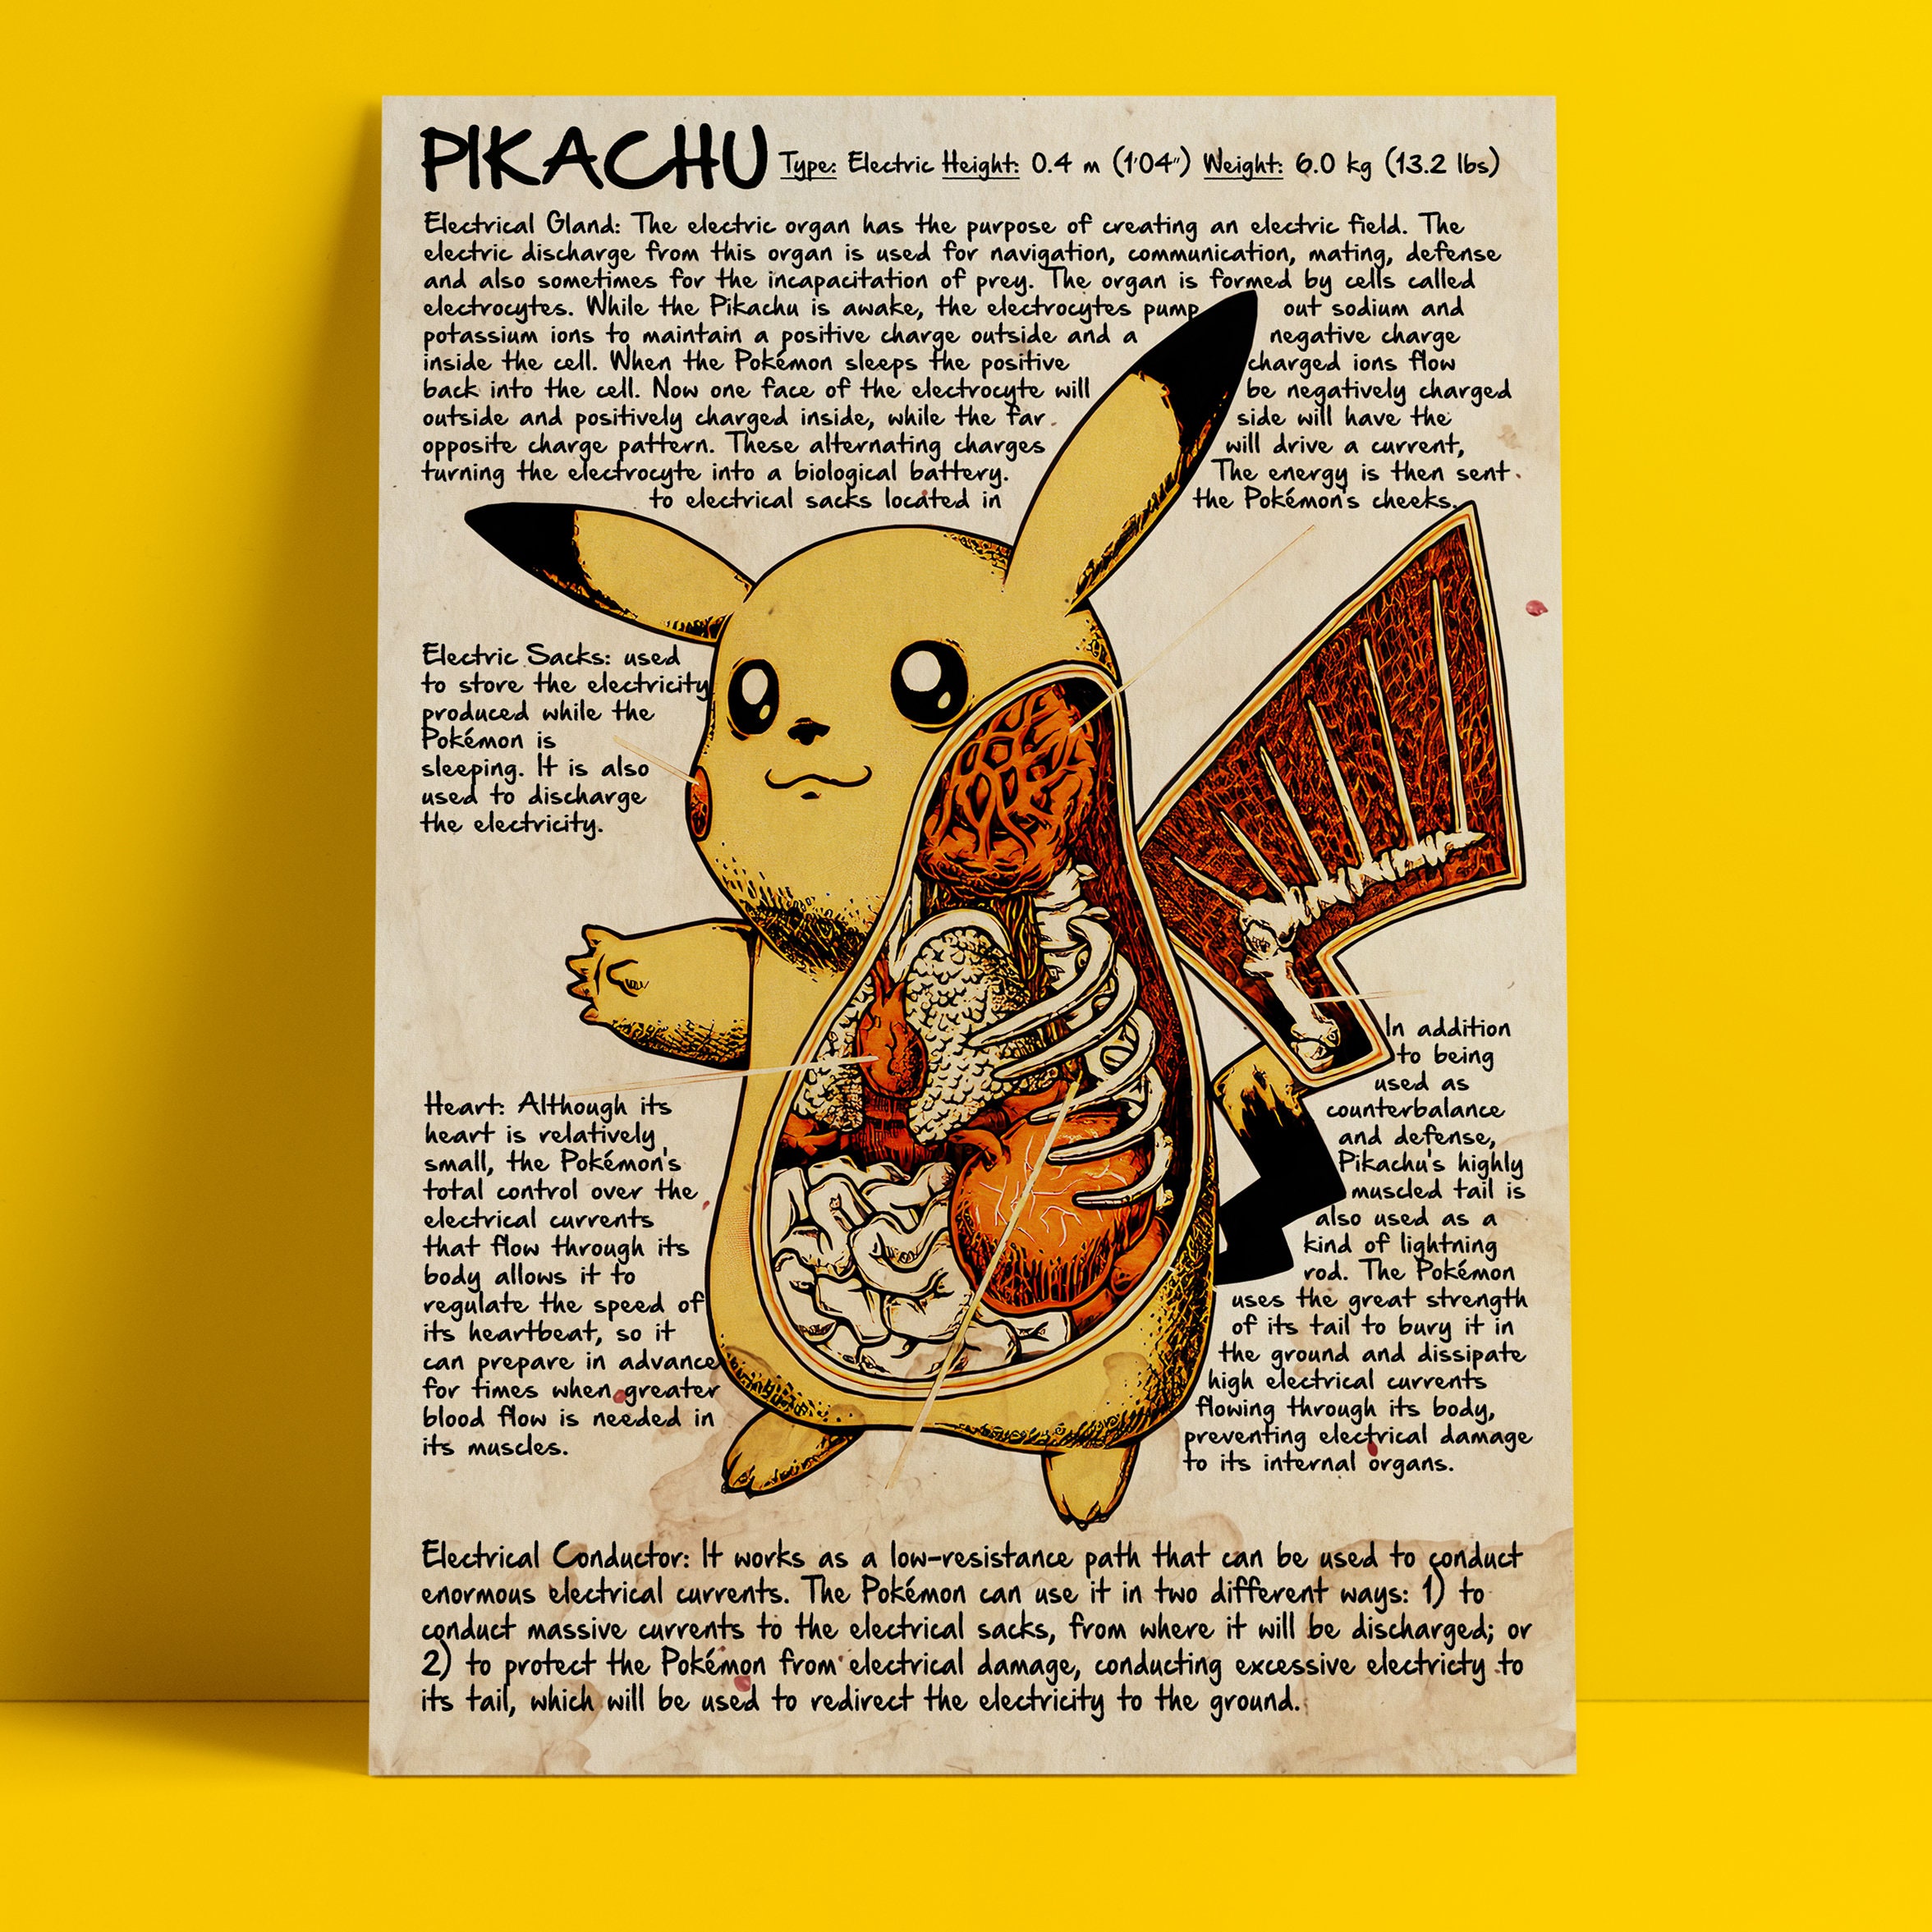 FUNNY PIKACHU POKEMON POSTER COOL SHOPPING CANVAS TOTE BAG IDEAL GIFT PRESENT